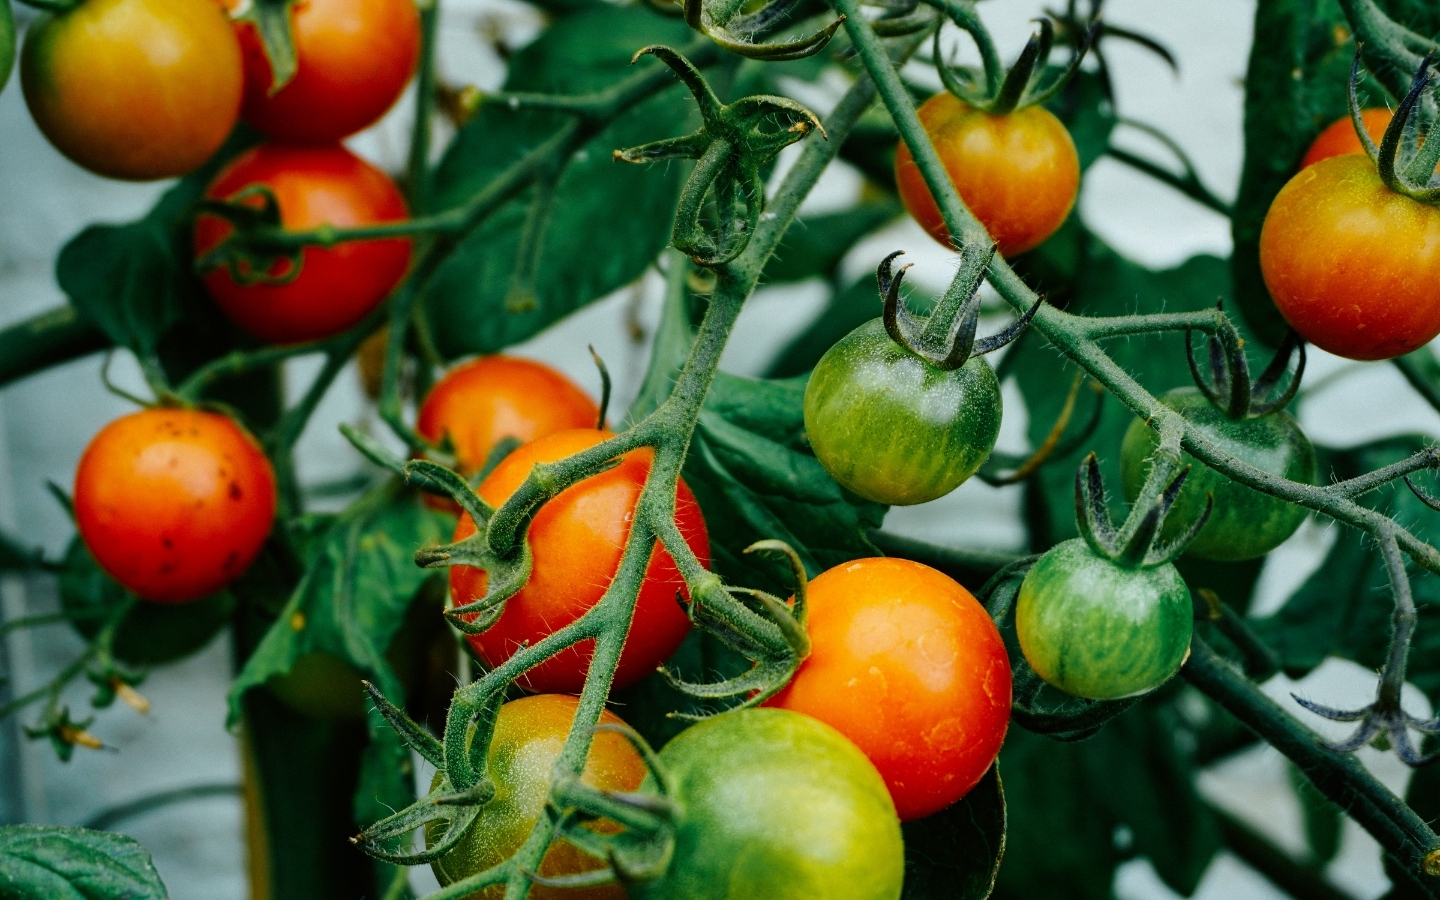 Tomatoes on a vine in garden